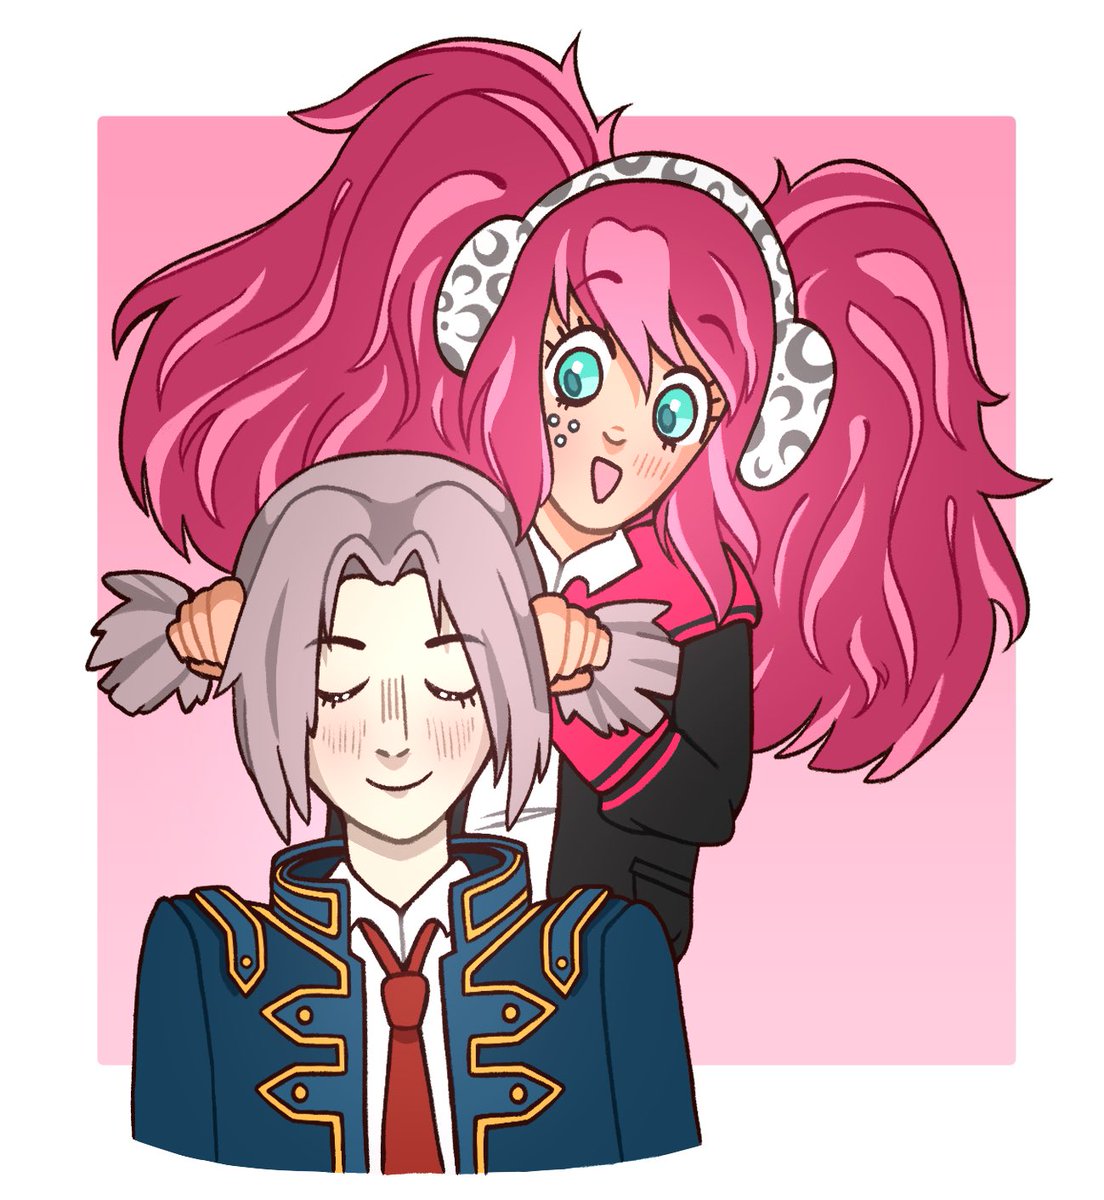 I think it’s about time I start using this account for realsies … I come bearing field siblings artwork #zeroescape